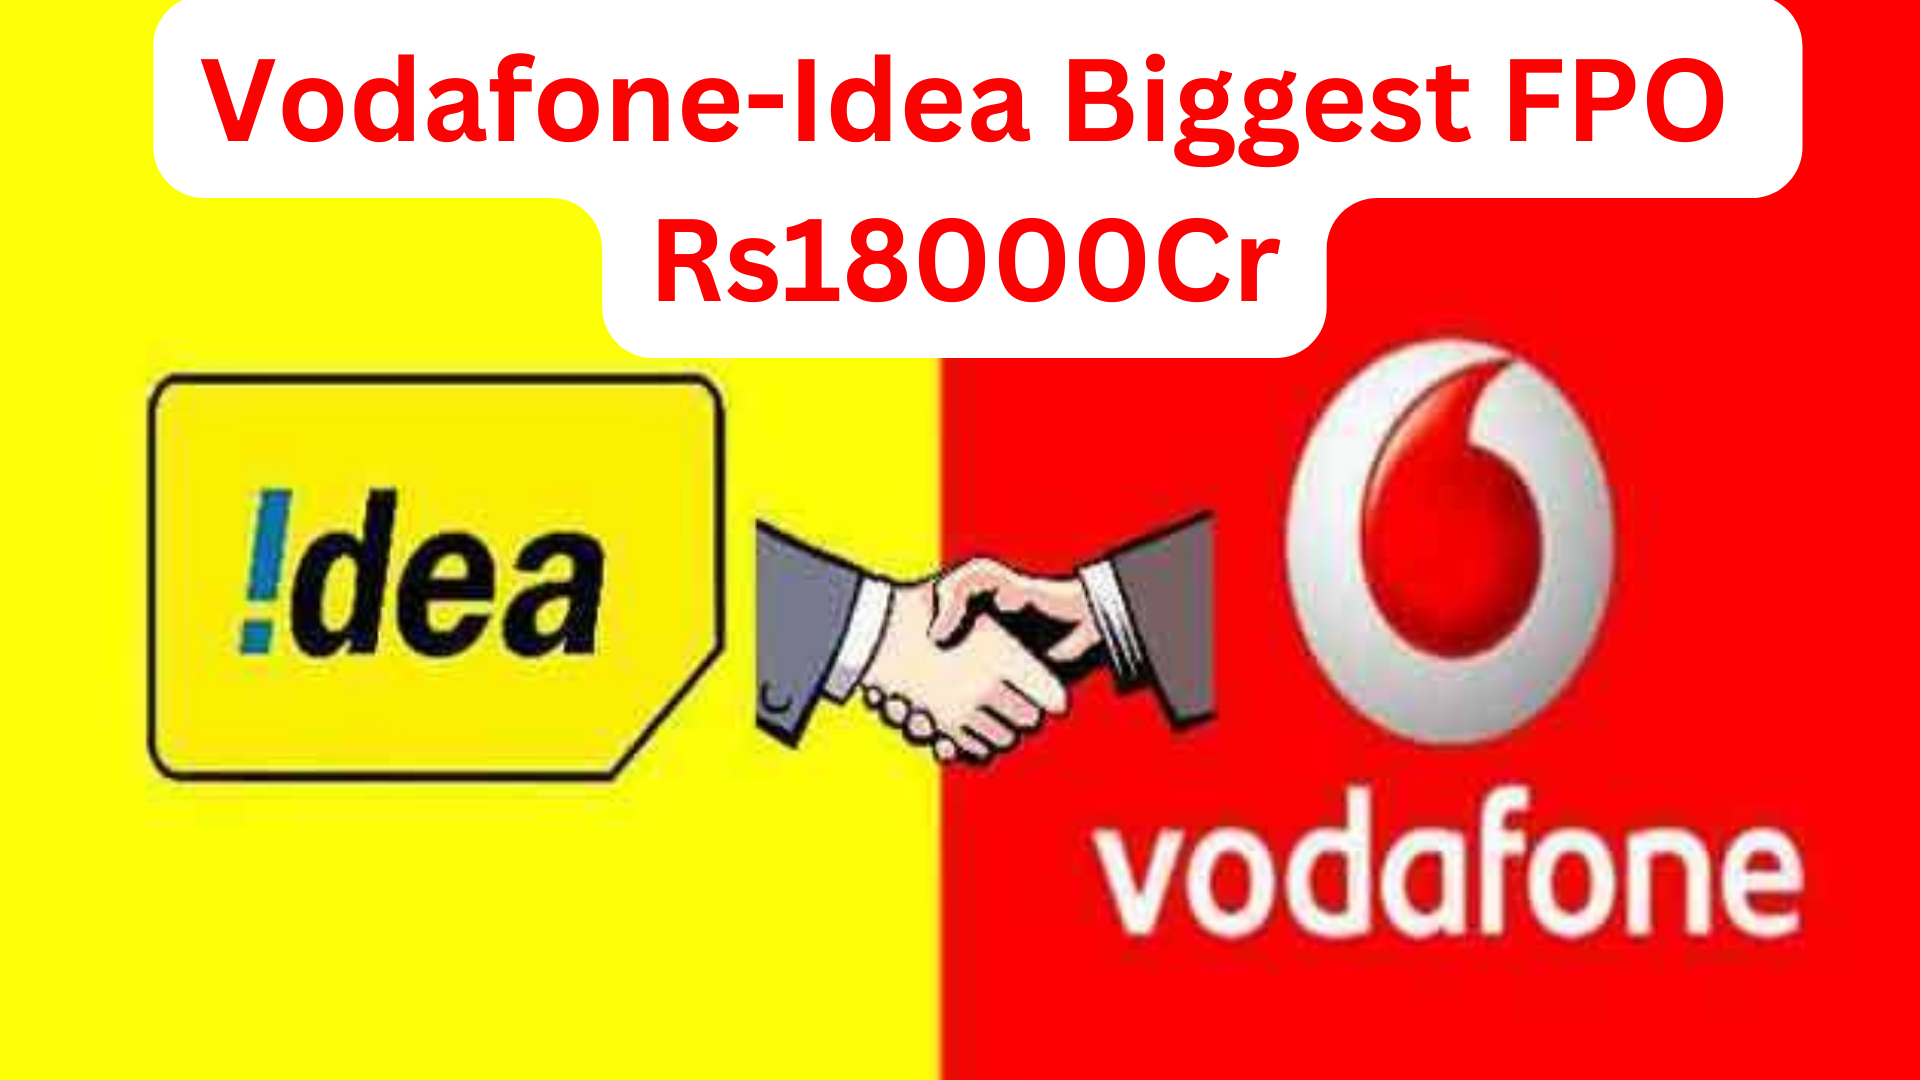 What is Vodafone-Idea New Survival Plan? India Biggest FPO Rs18000Cr